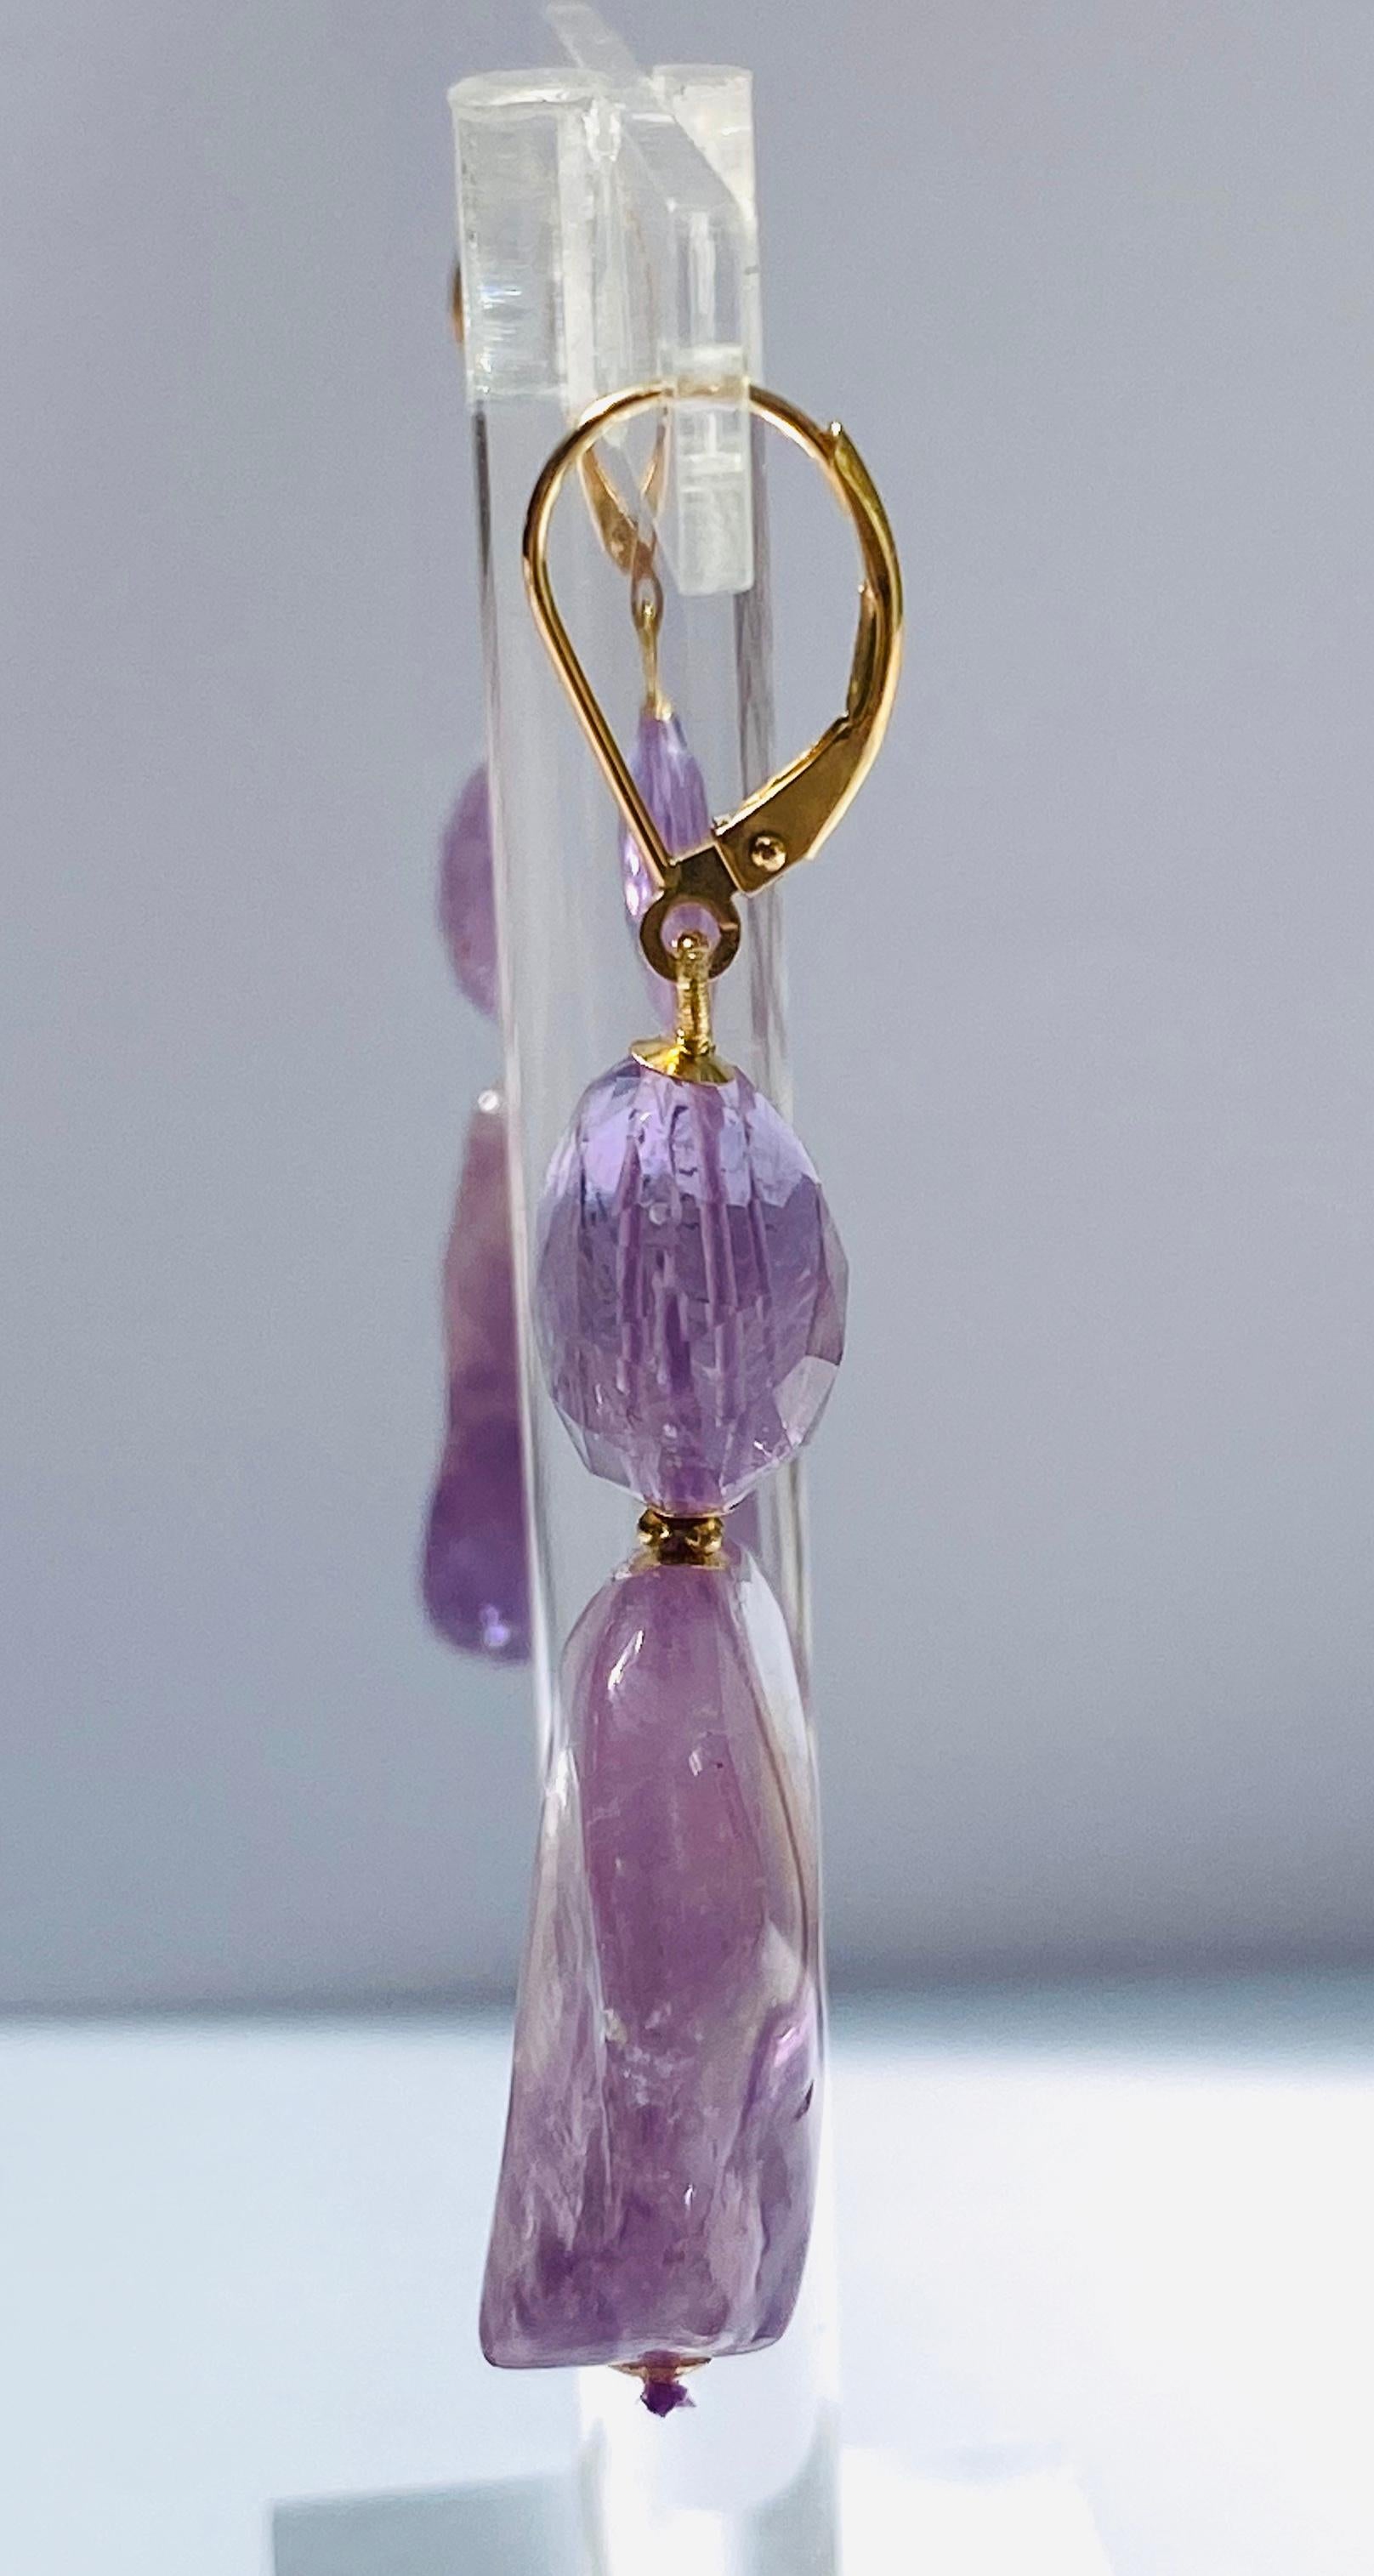 Marina J. Double Amethyst Bead Earrings with 14 Karat Gold Lever-Back and Beads In New Condition For Sale In Los Angeles, CA